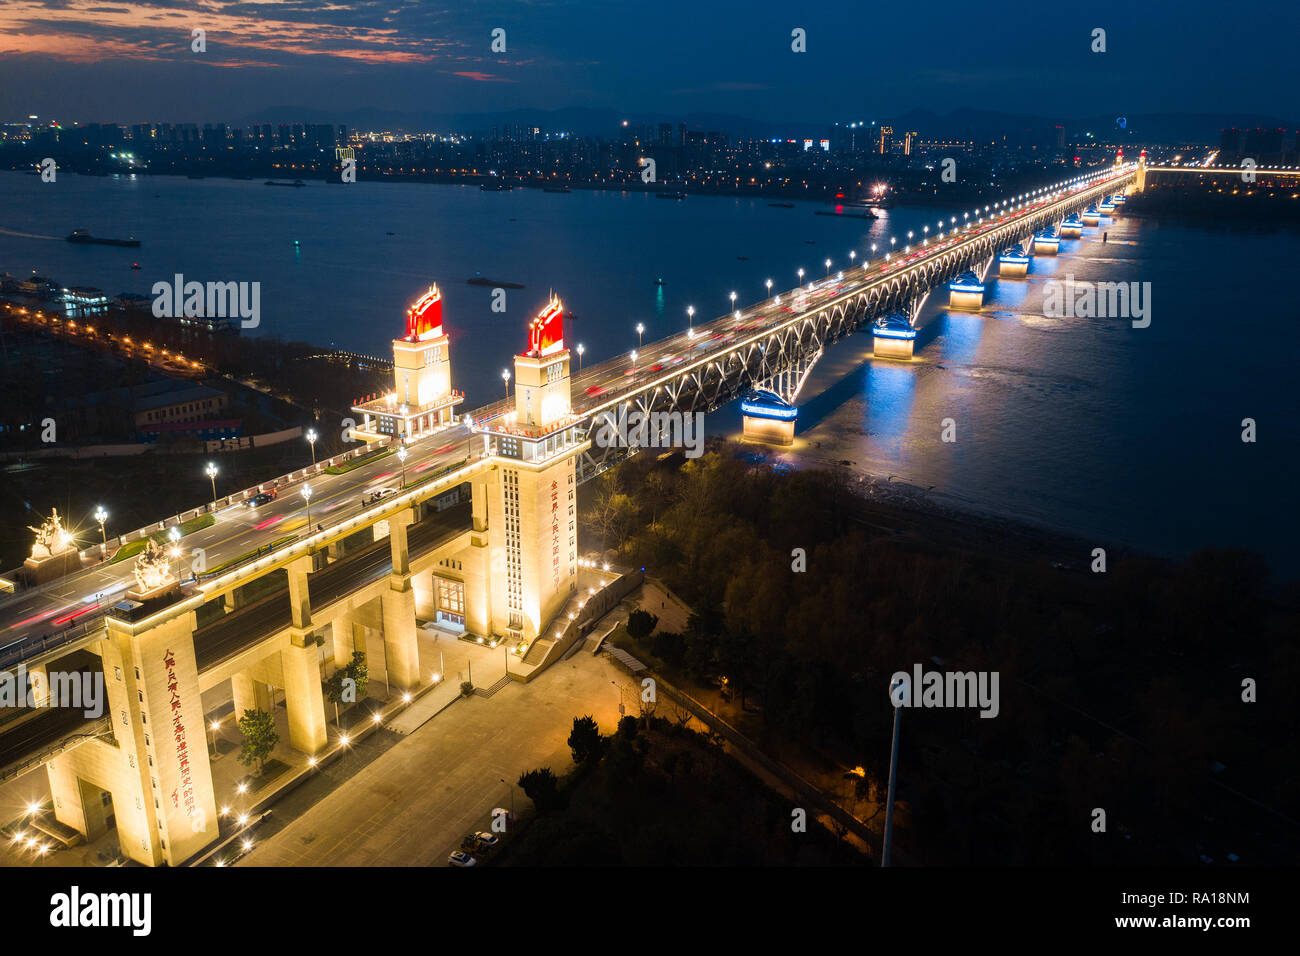 Nanjing, China. 29th Dec, 2018. The Nanjing Yangtze River Bridge, in east China's Jiangsu Province, reopened to road traffic Saturday after a 26-month renovation. A double-decked road-rail truss bridge across the Yangtze River, the 1,576 meter long Nanjing Yangtze River Bridge was completed and originally open for traffic in 1968. Credit: SIPA Asia/ZUMA Wire/Alamy Live News Stock Photo